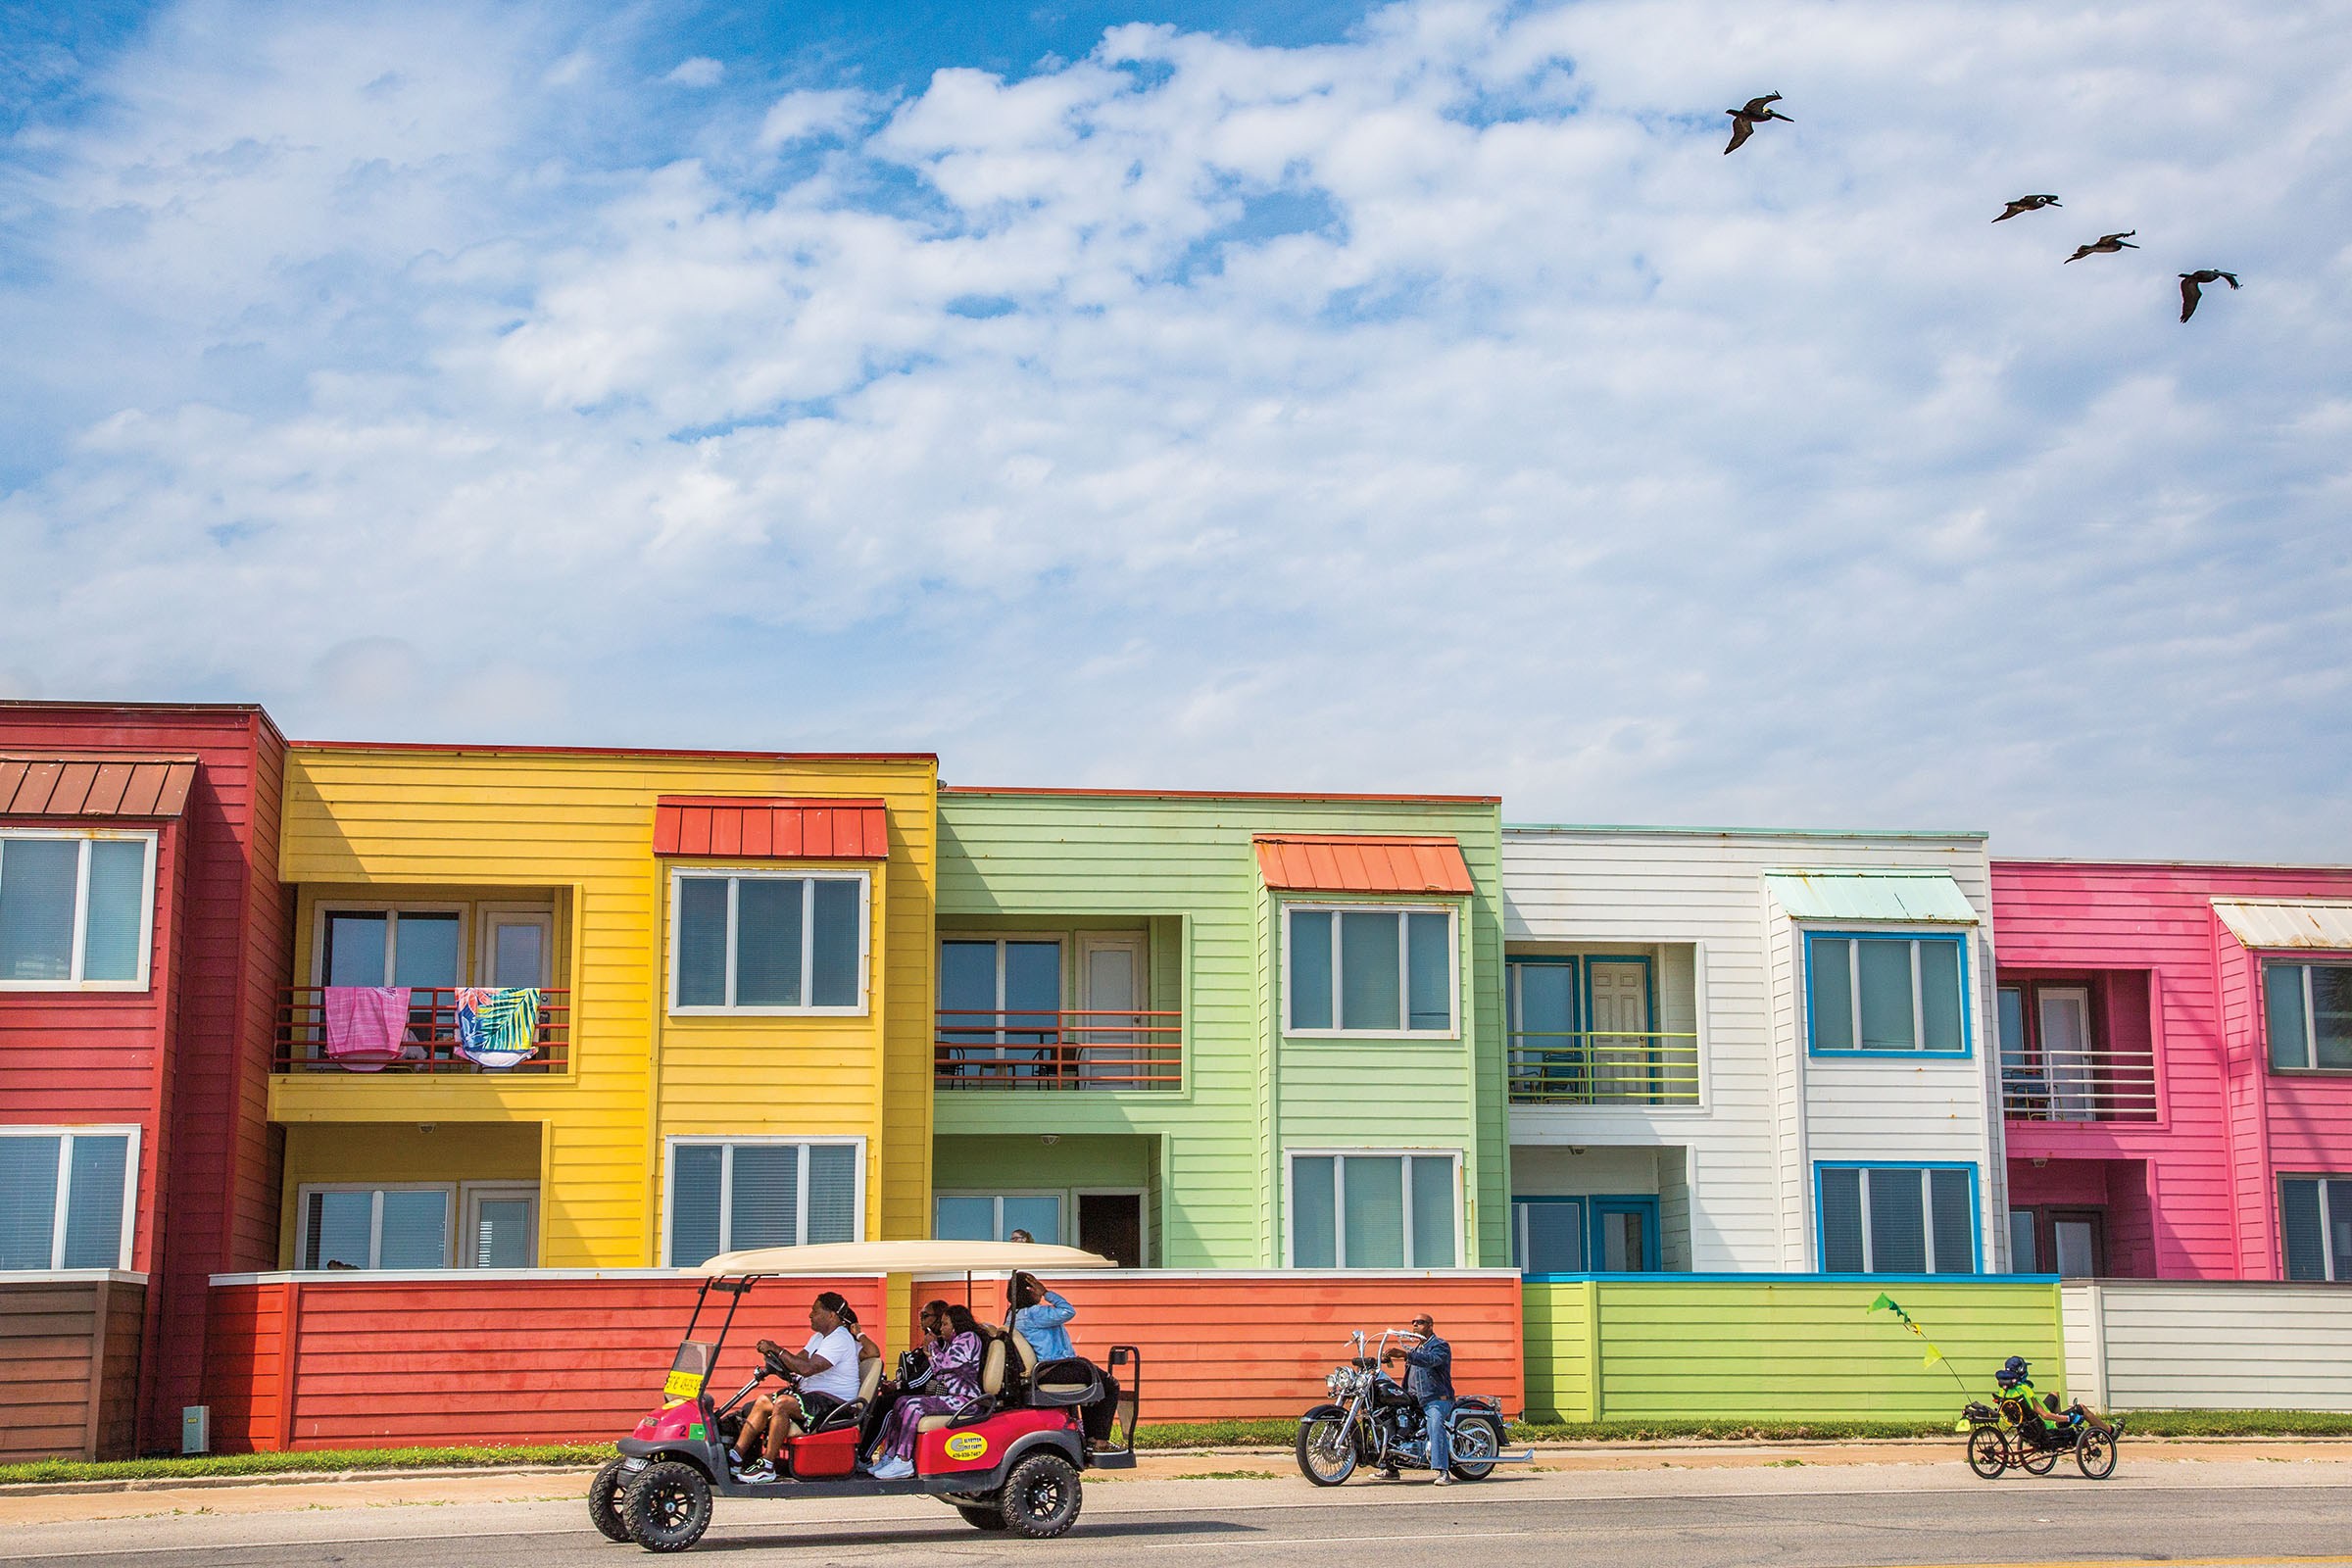 A small group of people in golf carts and motorcycles drive in front of brightly colored buildings under a blue sky